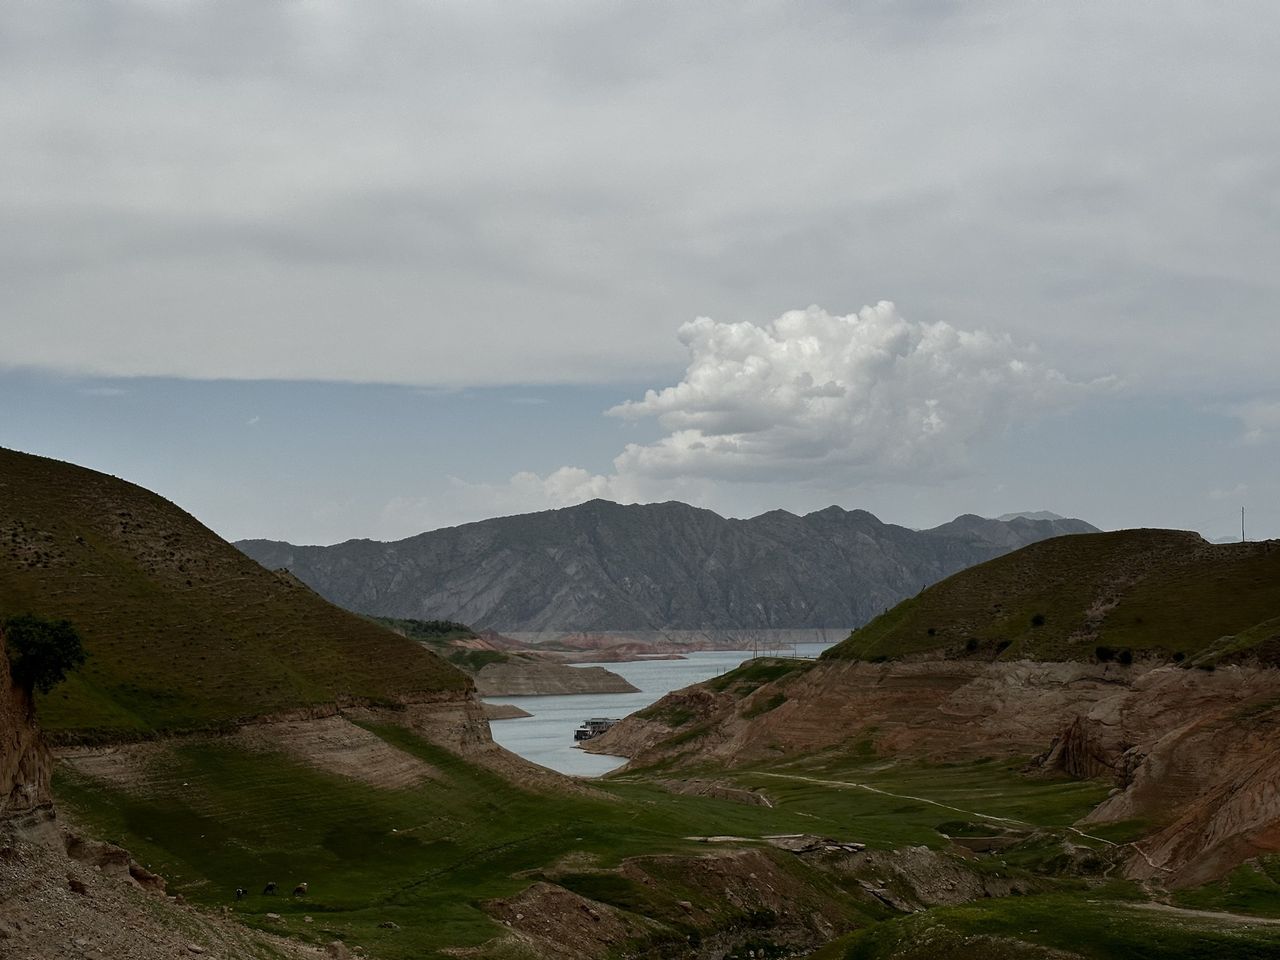 The expedition along the Amu Darya River basin ended in Tajikistan